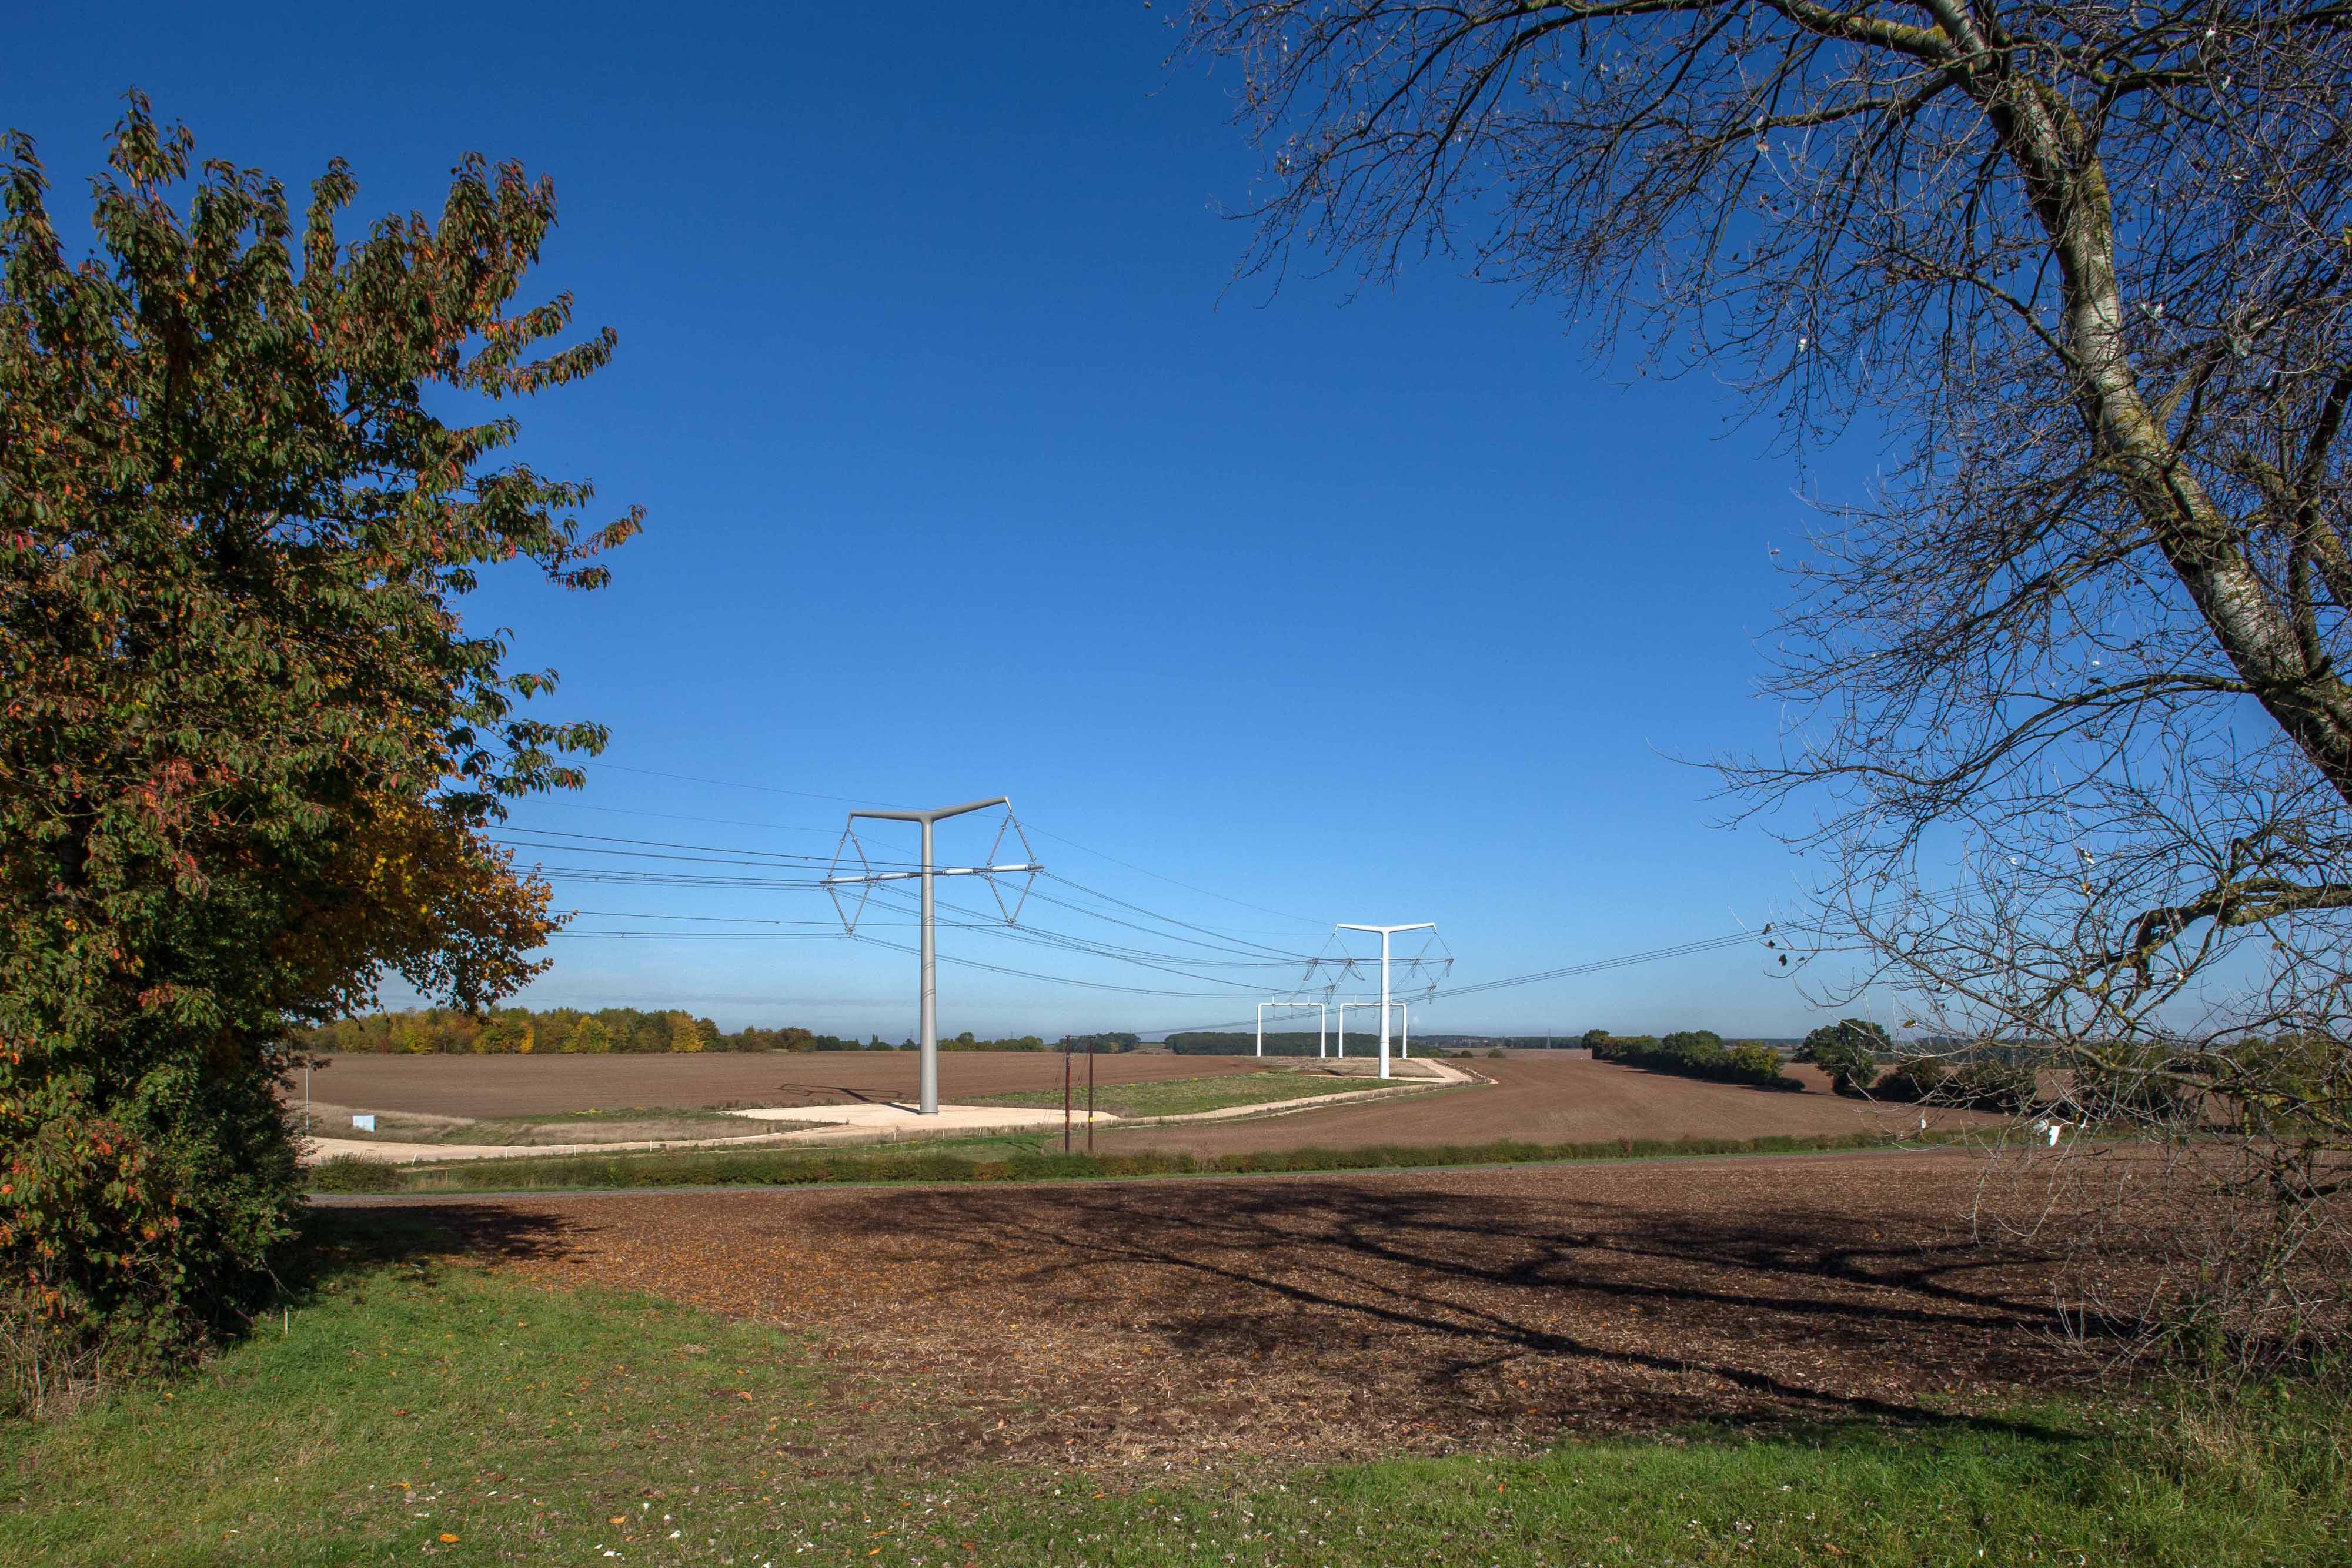 T-pylons across field with trees in the foreground